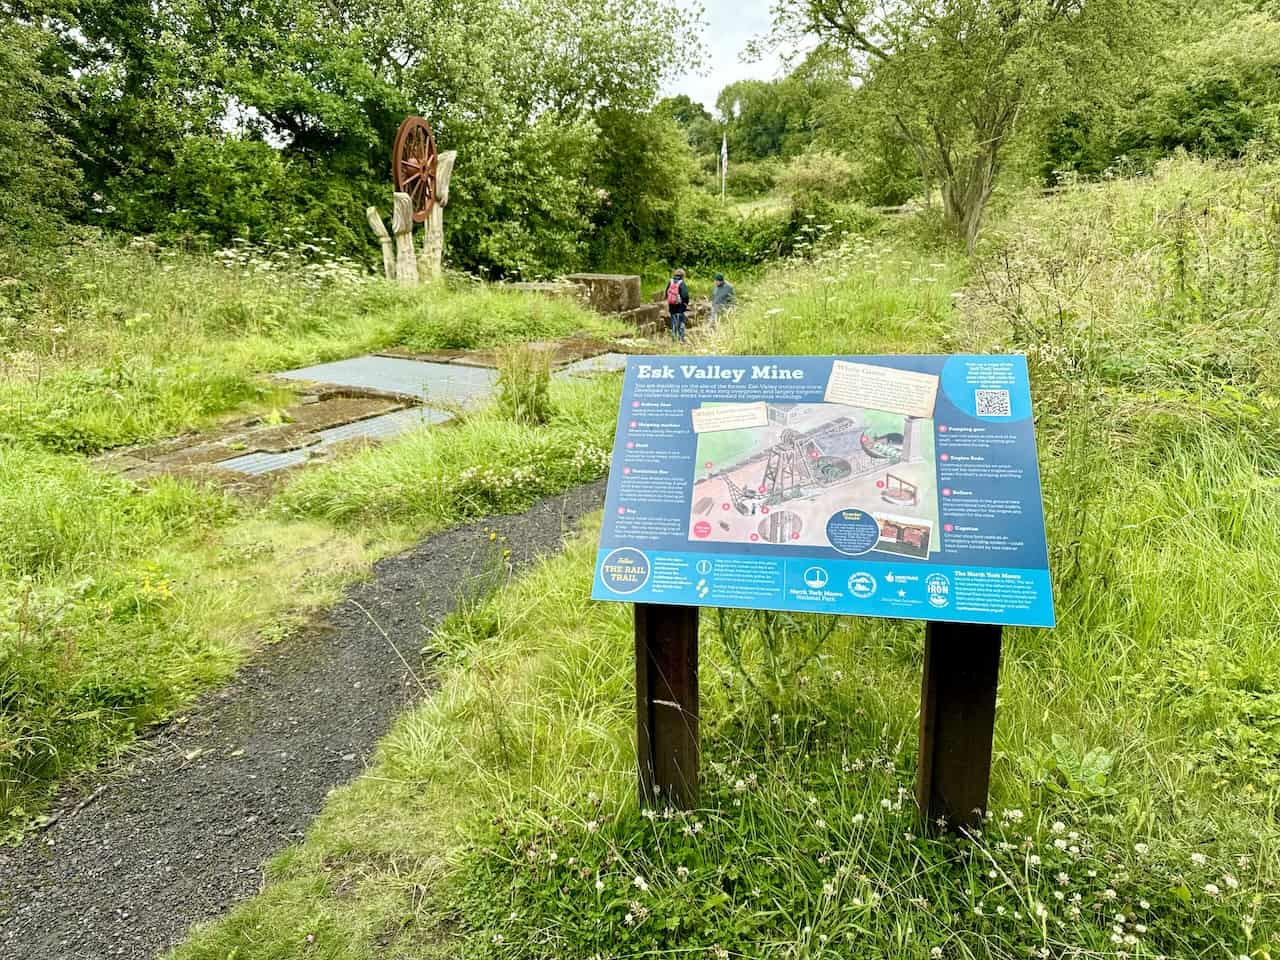 Path leading to the site of the Esk Valley ironstone mine on the left, with two interpretation display boards explaining its history.